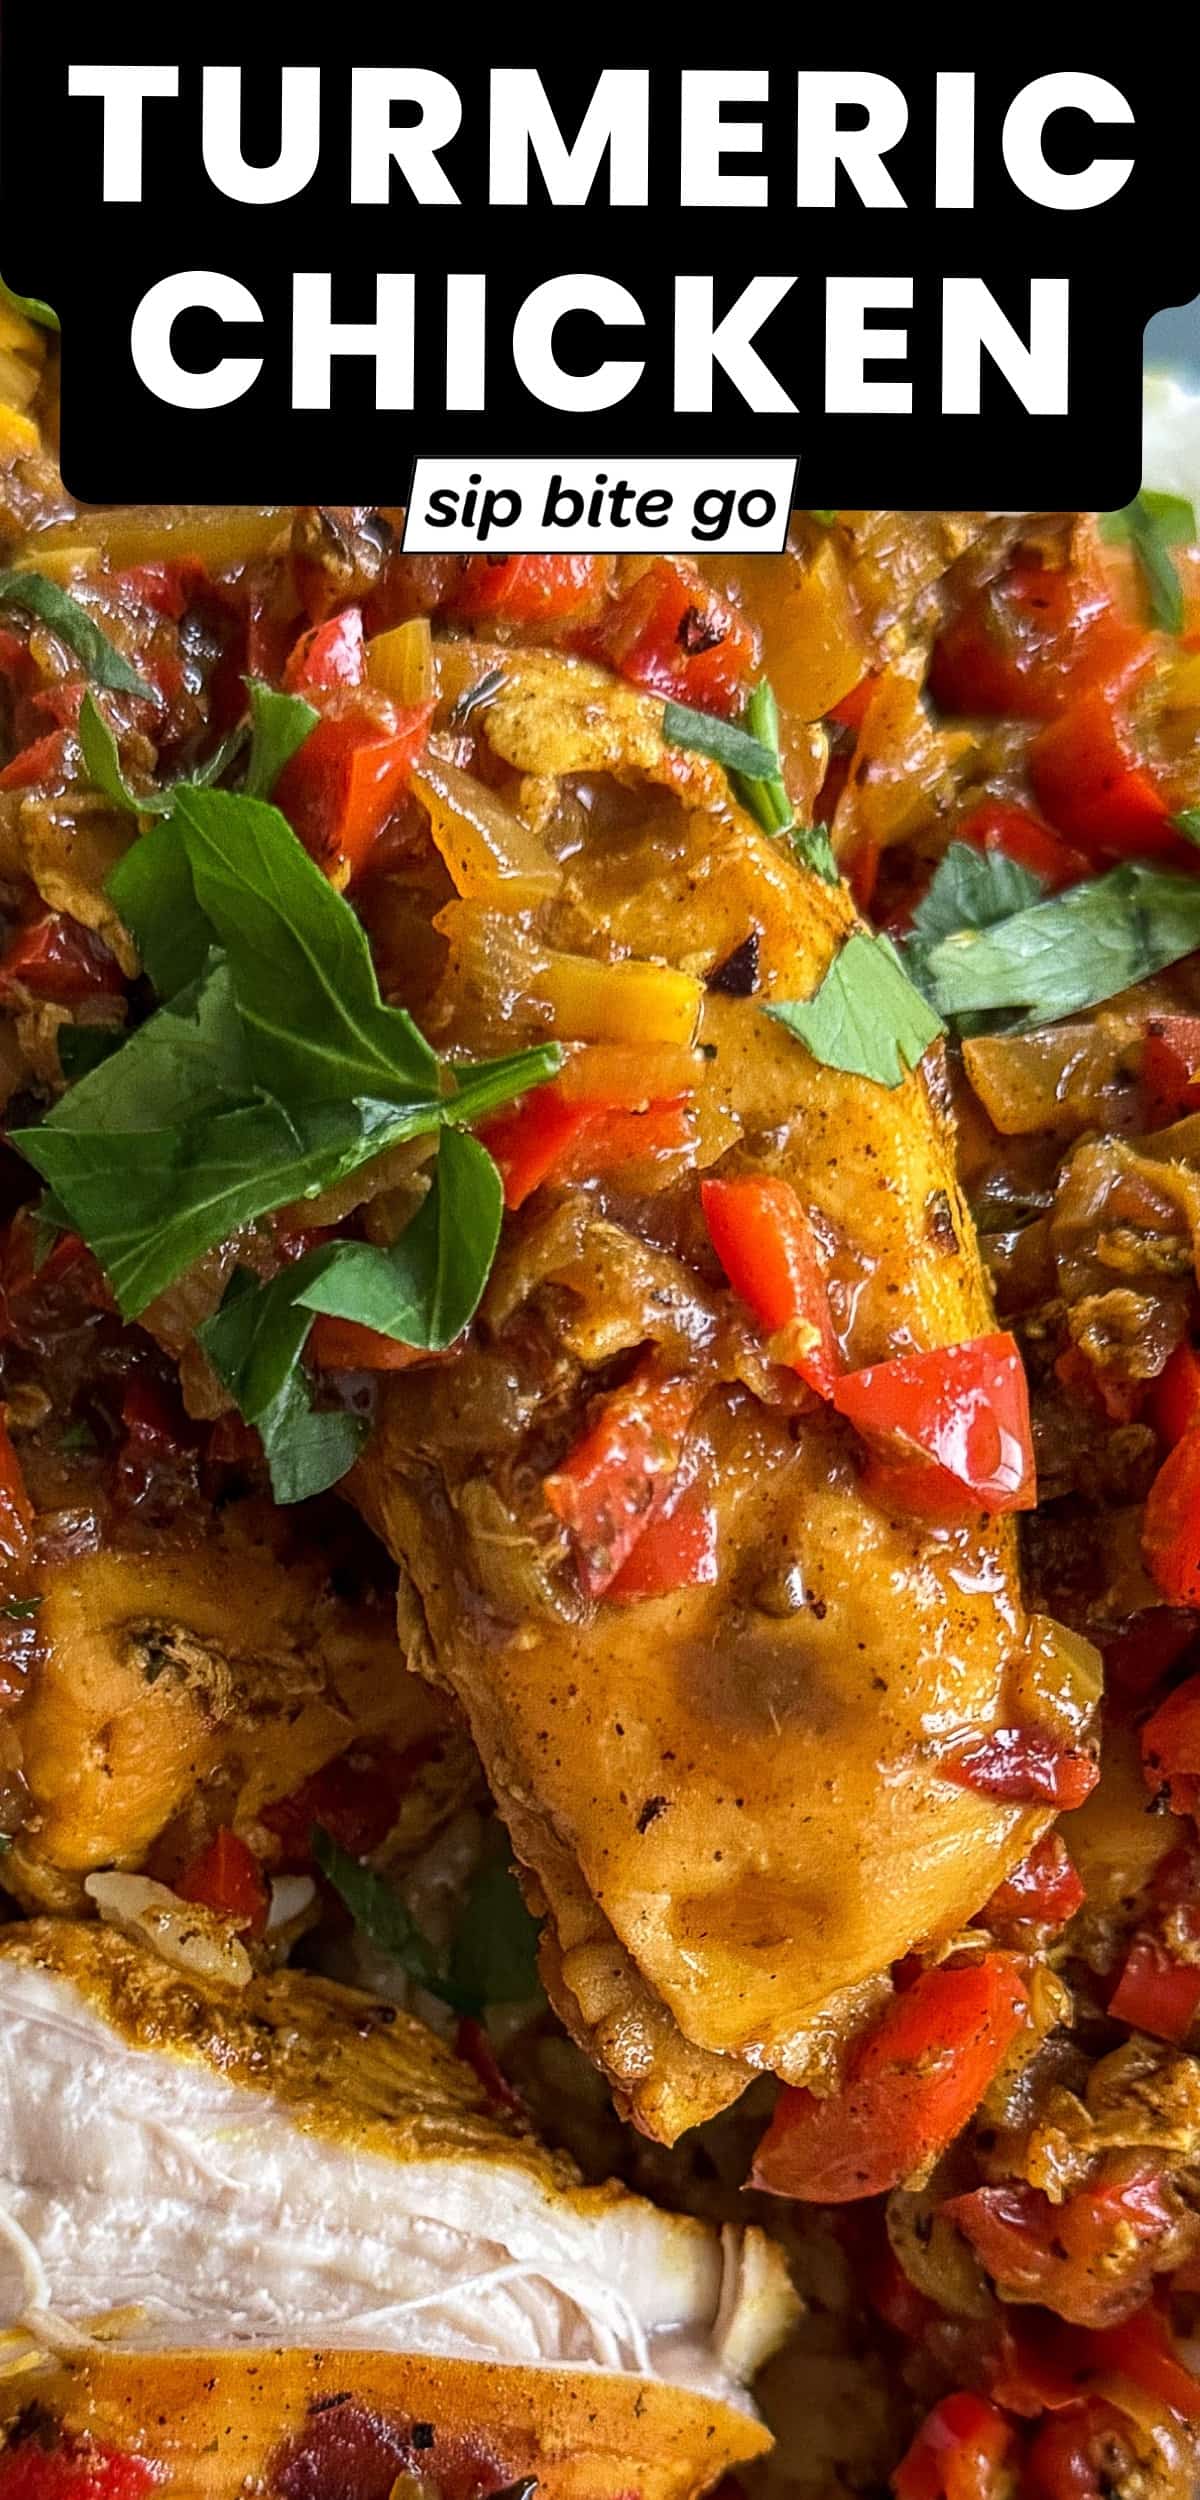 Turmeric Chicken Breast Recipe with text overlay